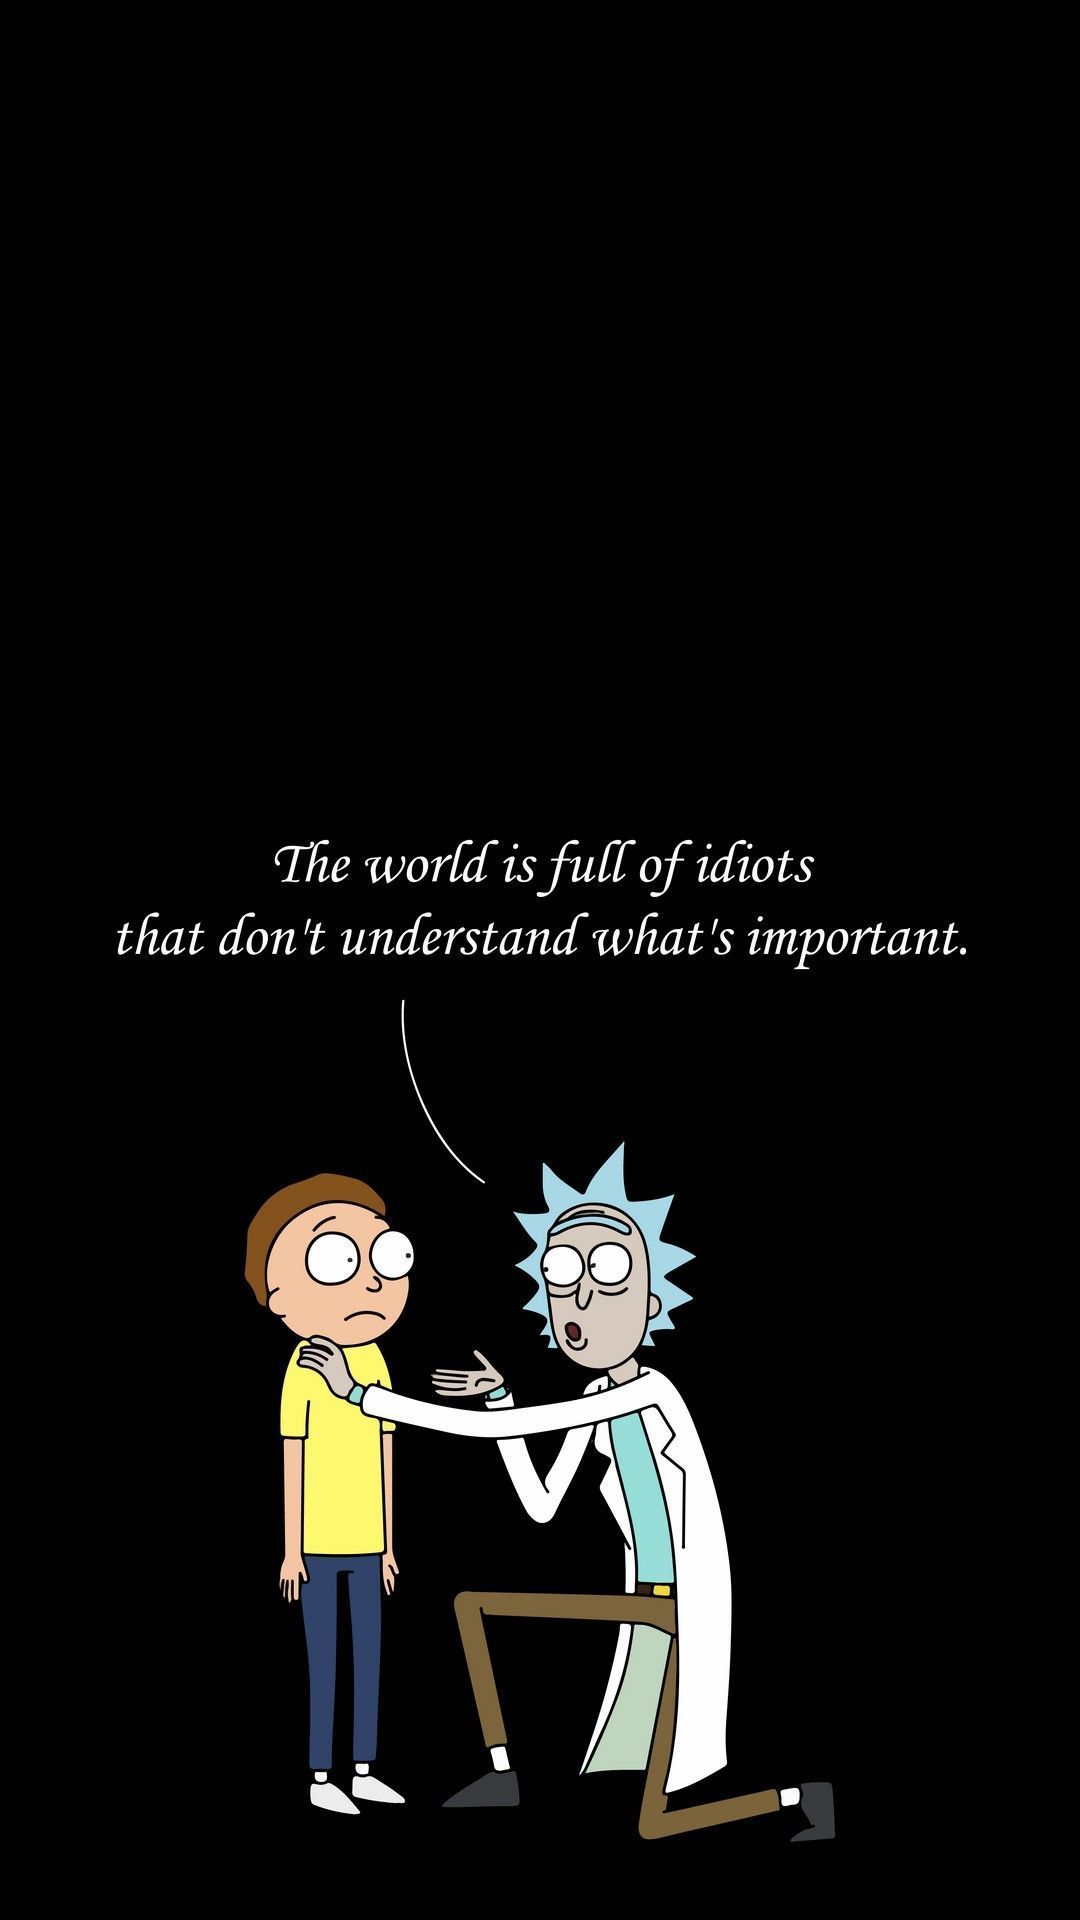 Rick and Morty Wallpaper iPhone - HeroWall Backgrounds